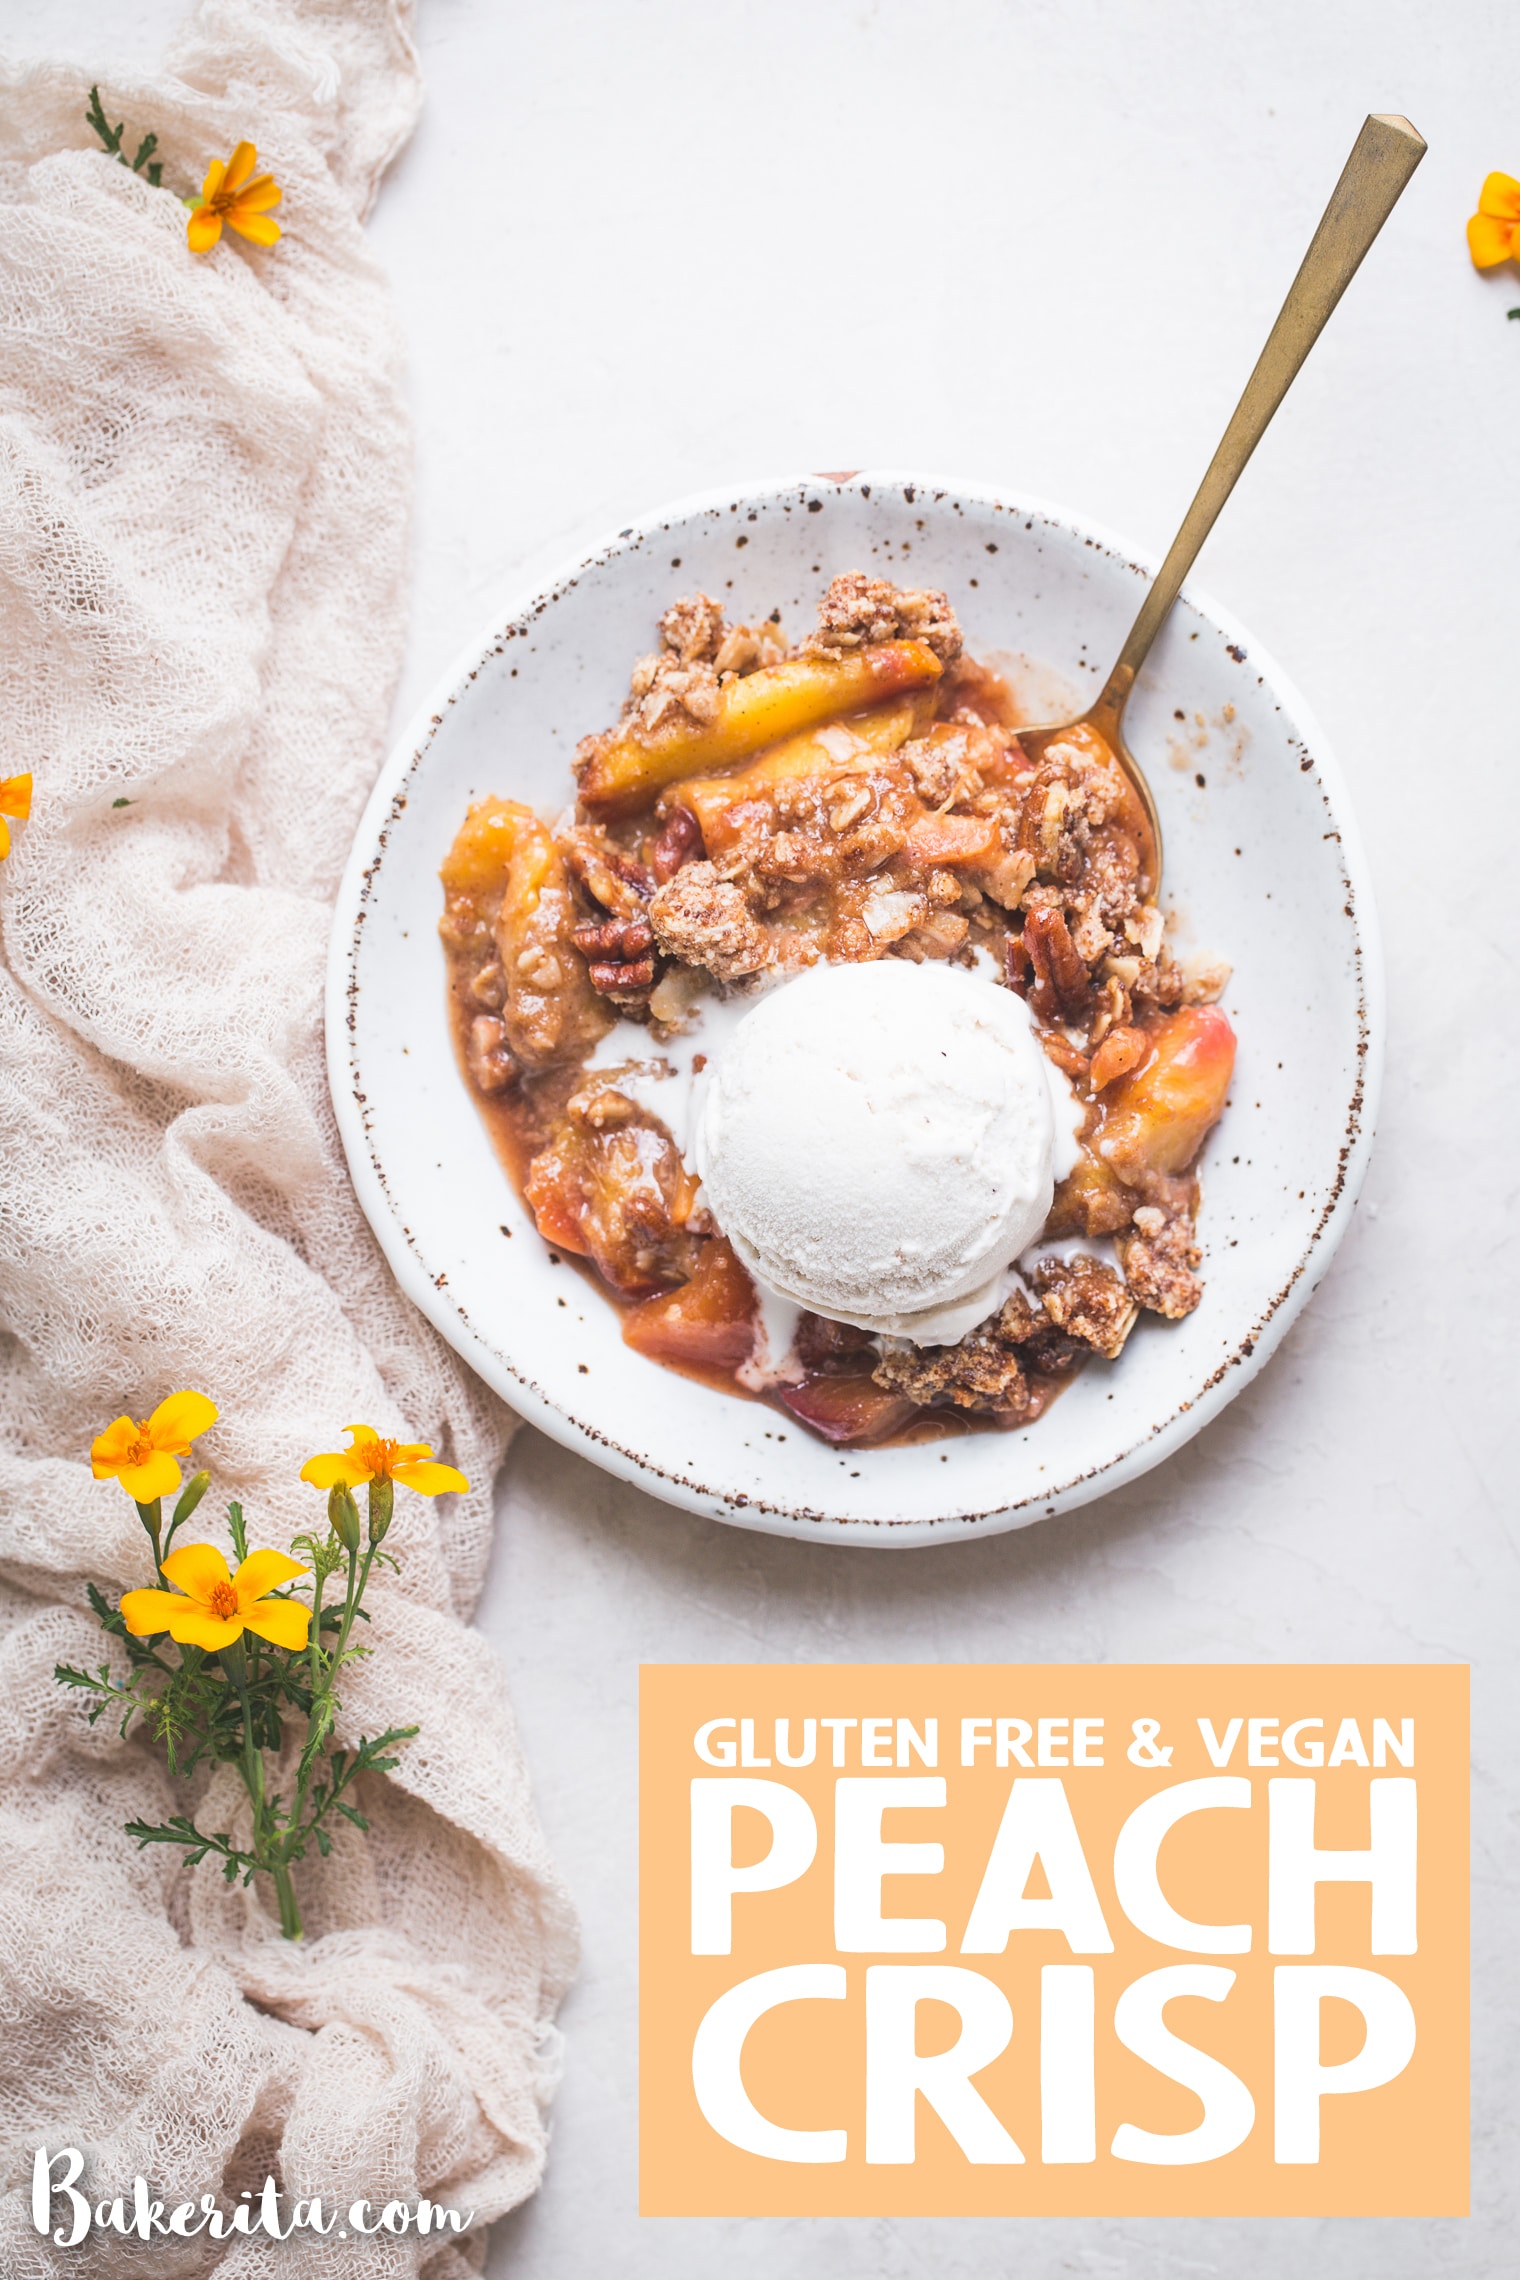 This Gluten-Free & Vegan Peach Crisp recipe is a healthy summer staple! The fresh peaches are baked until bubbling and perfectly complemented by the pecan oatmeal topping. Top with a scoop of ice cream for the perfect dessert or with plain yogurt for a healthy breakfast.